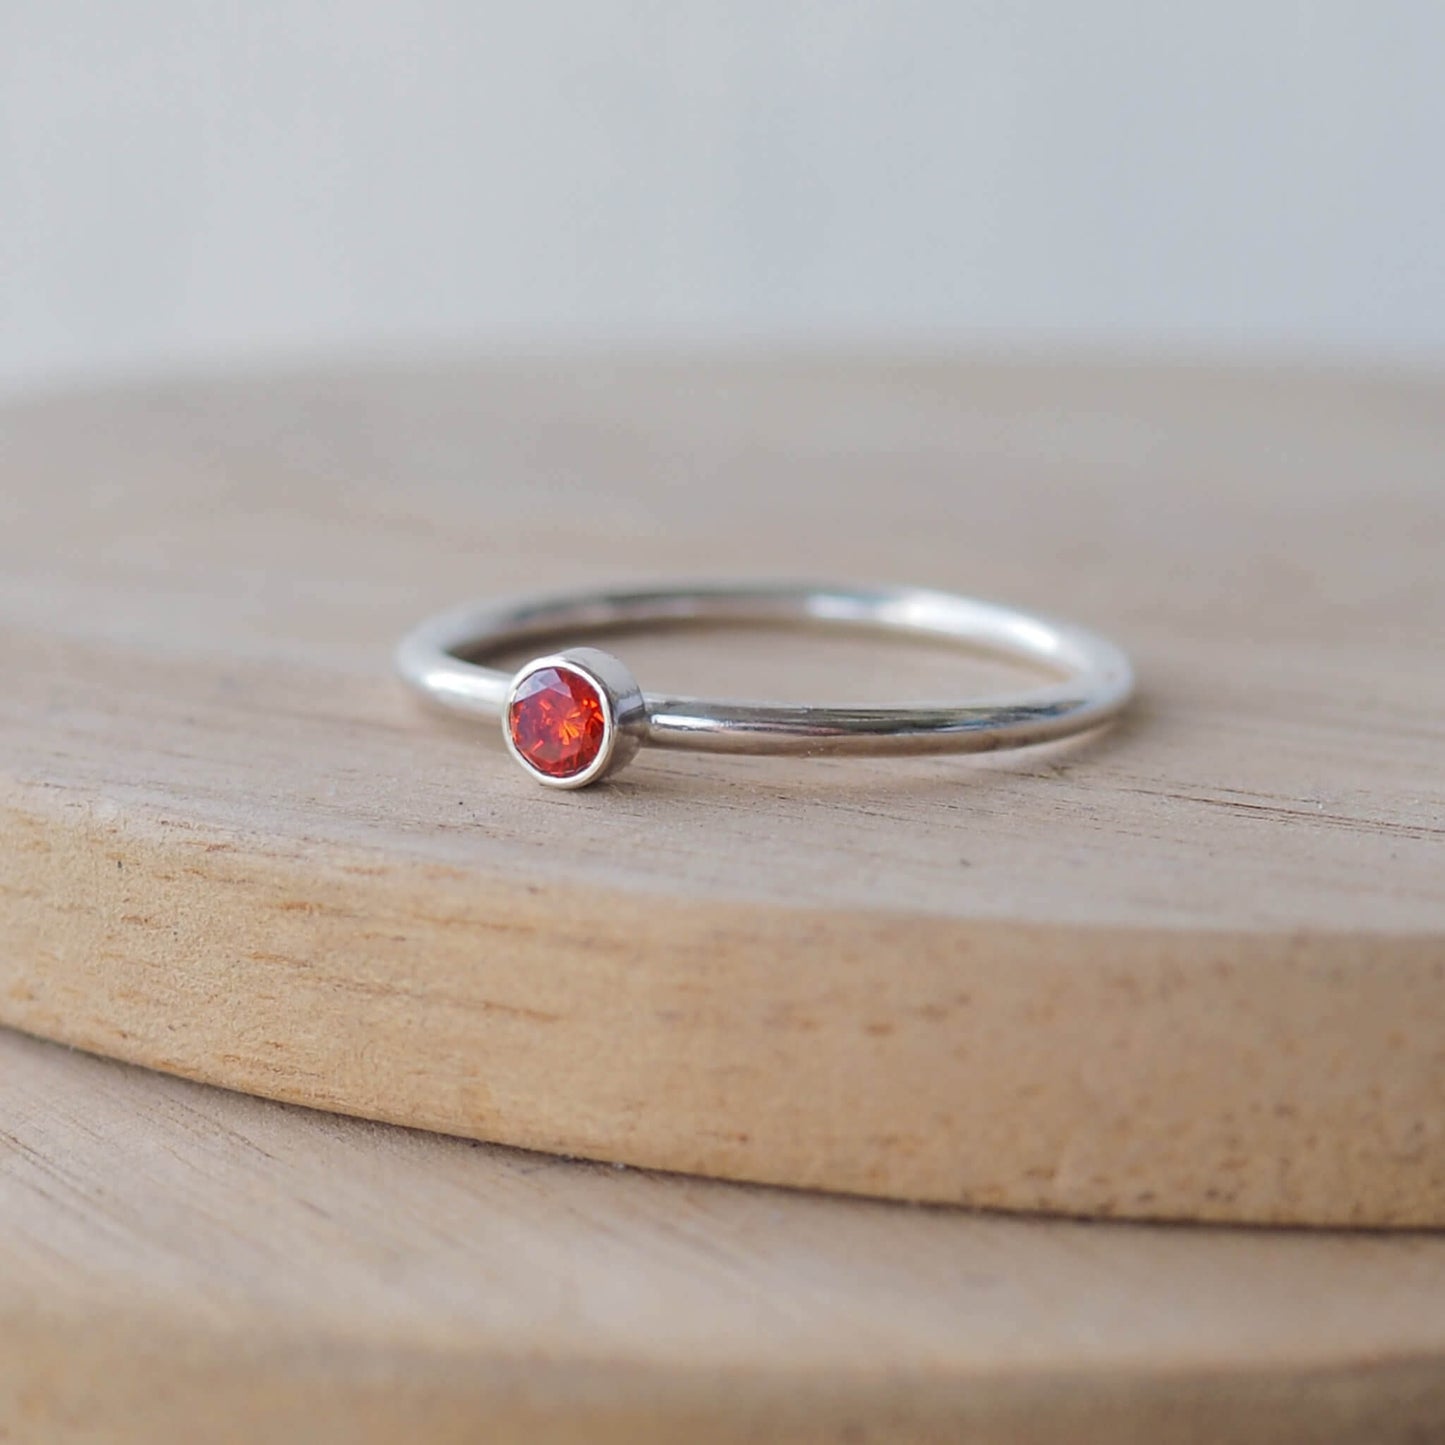 Garnet and silver minimalist solitaire ring. Made from a modern band of square silver wire with a simple round  red faceted cubic zirconia. Handmade in Scotland by Maram Jewellery